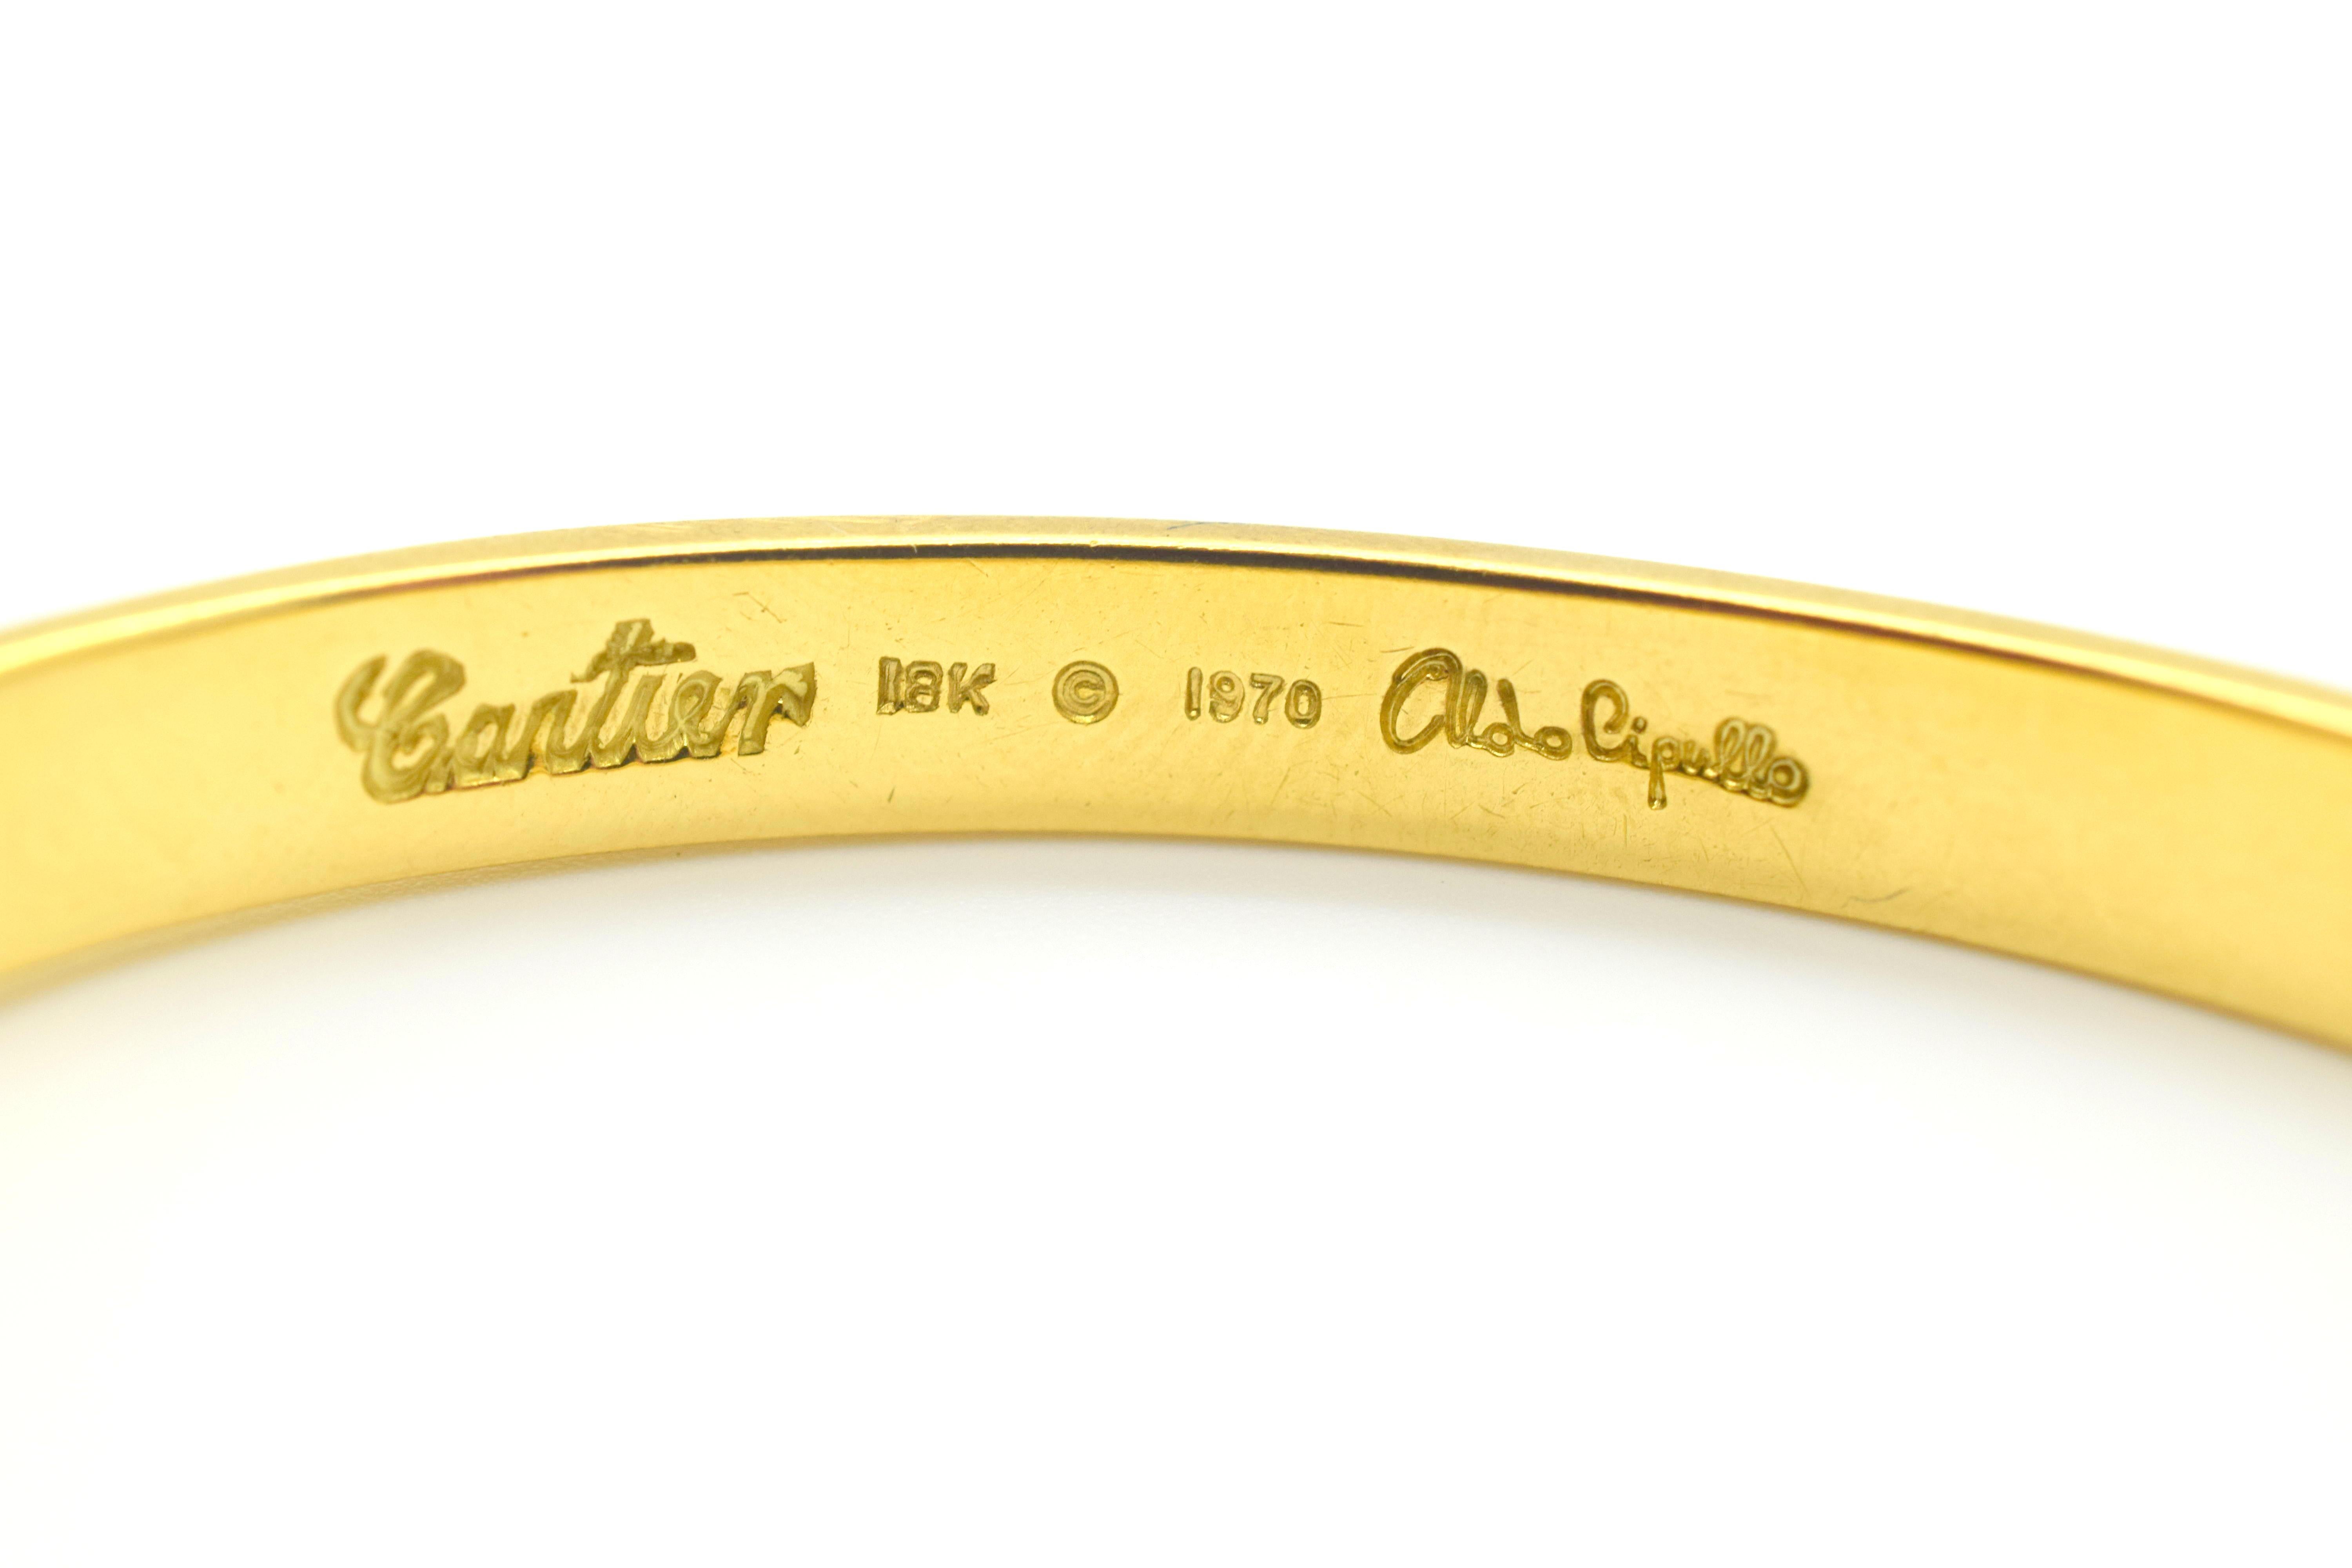 Vintage Cartier Love Bracelet by Aldo Cipullo. Love bangle is a size 17 and is in great used condition. The bangle is hallmarked 